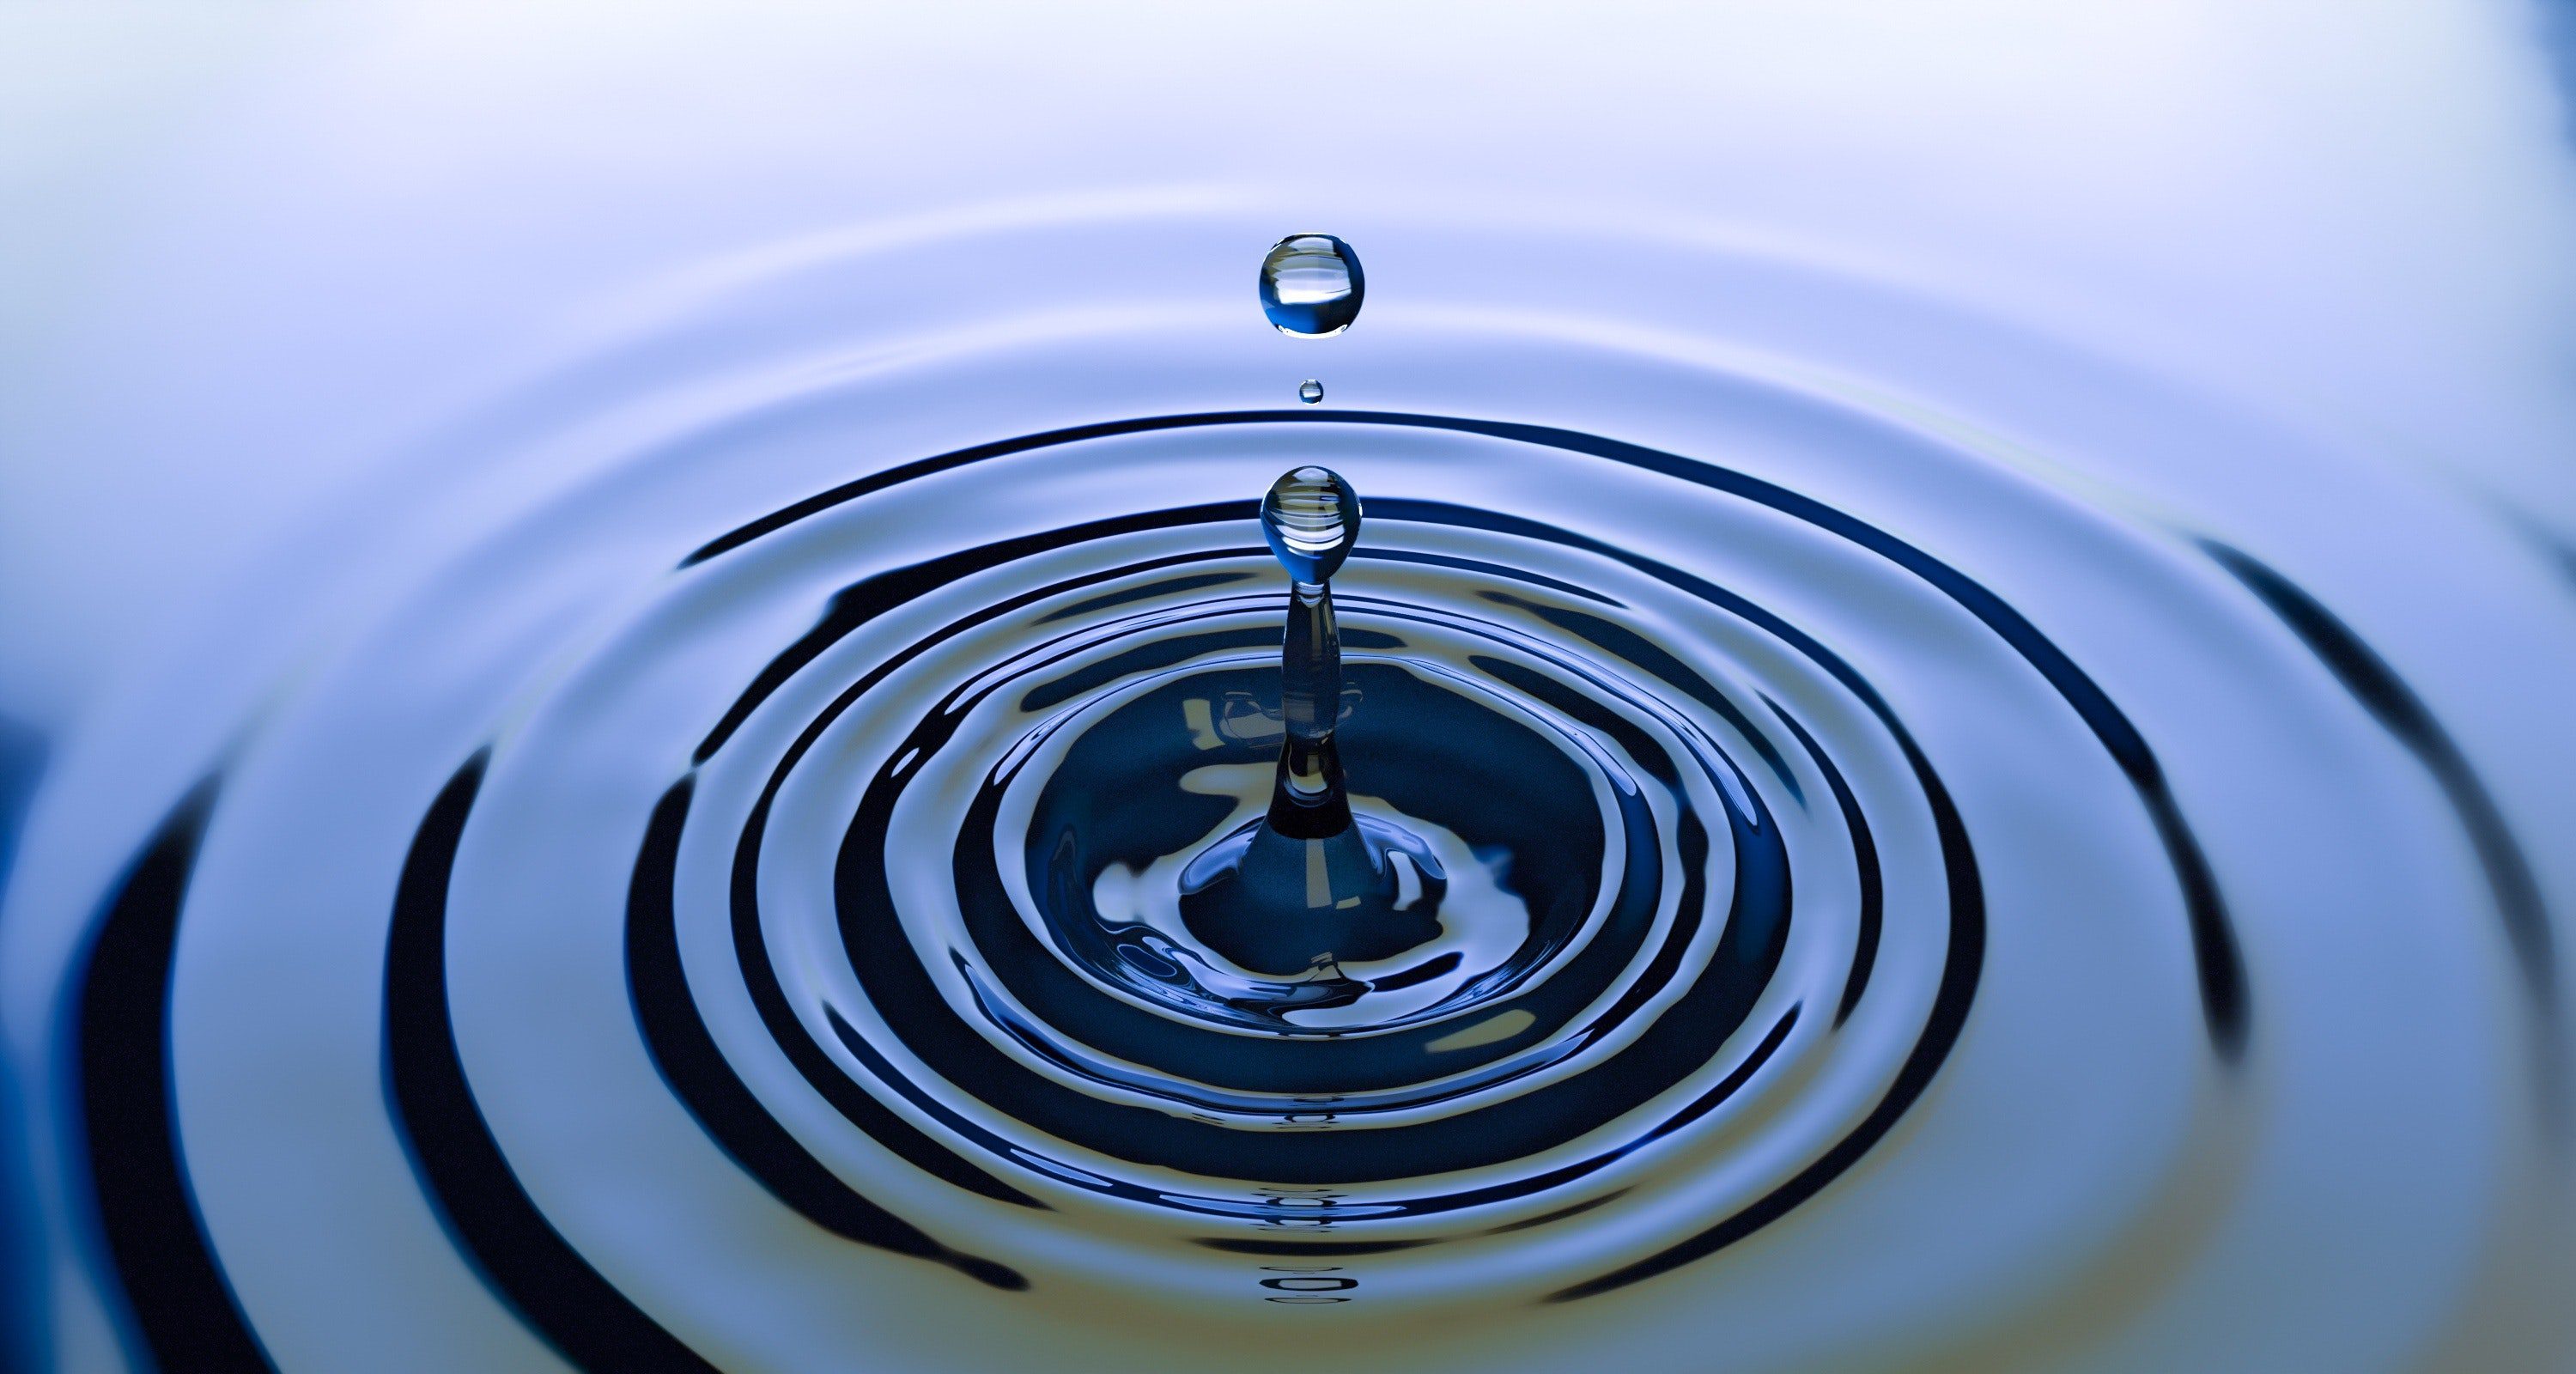 A water droplet.